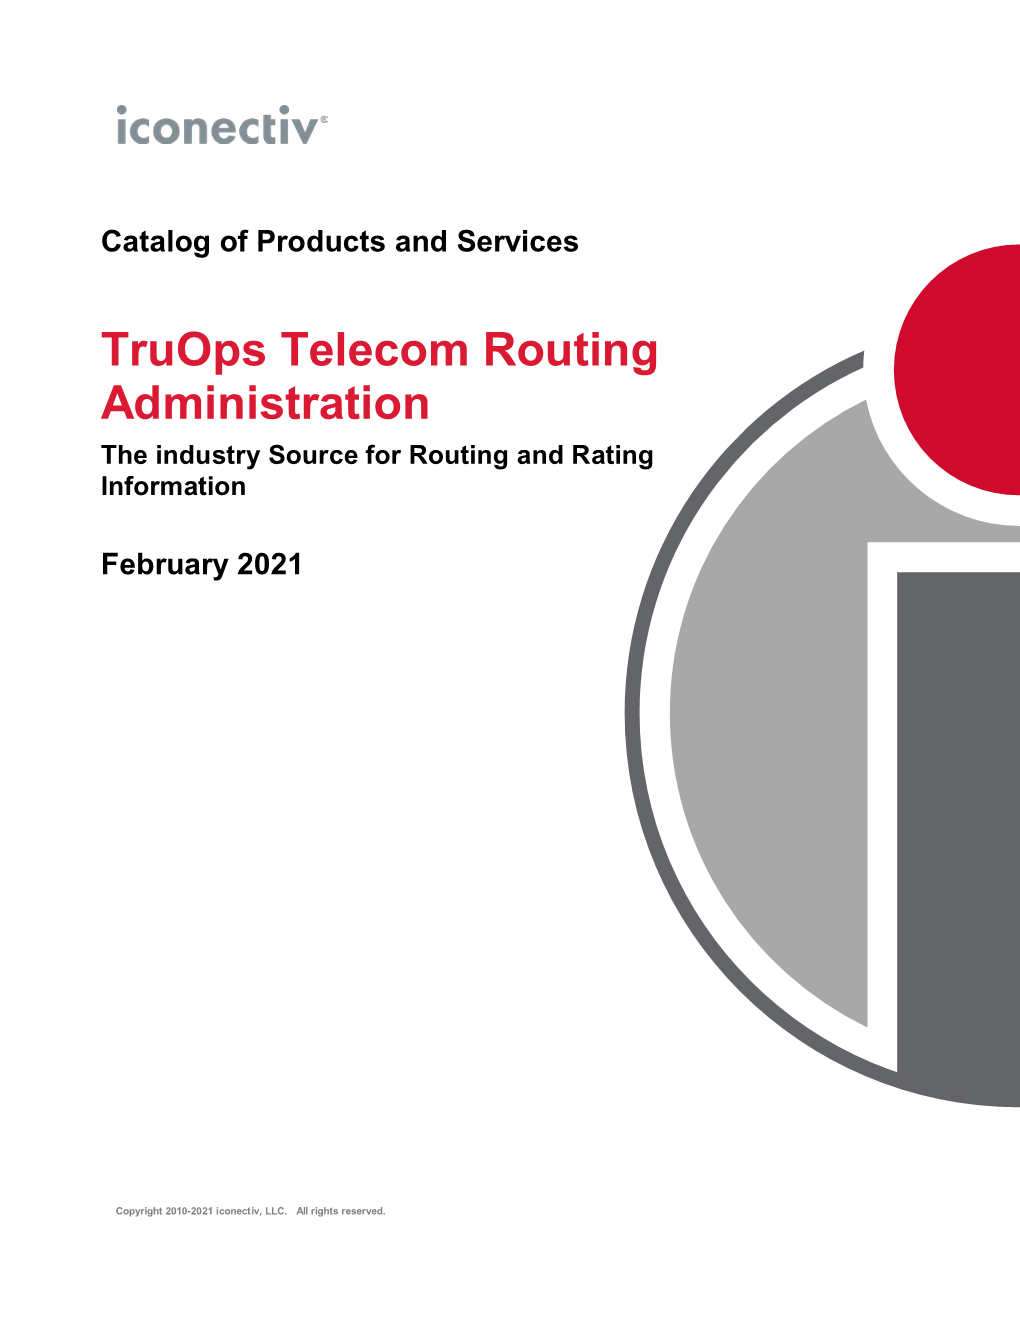 Truops Telecom Routing Administration Catalog of Products Table of Contents